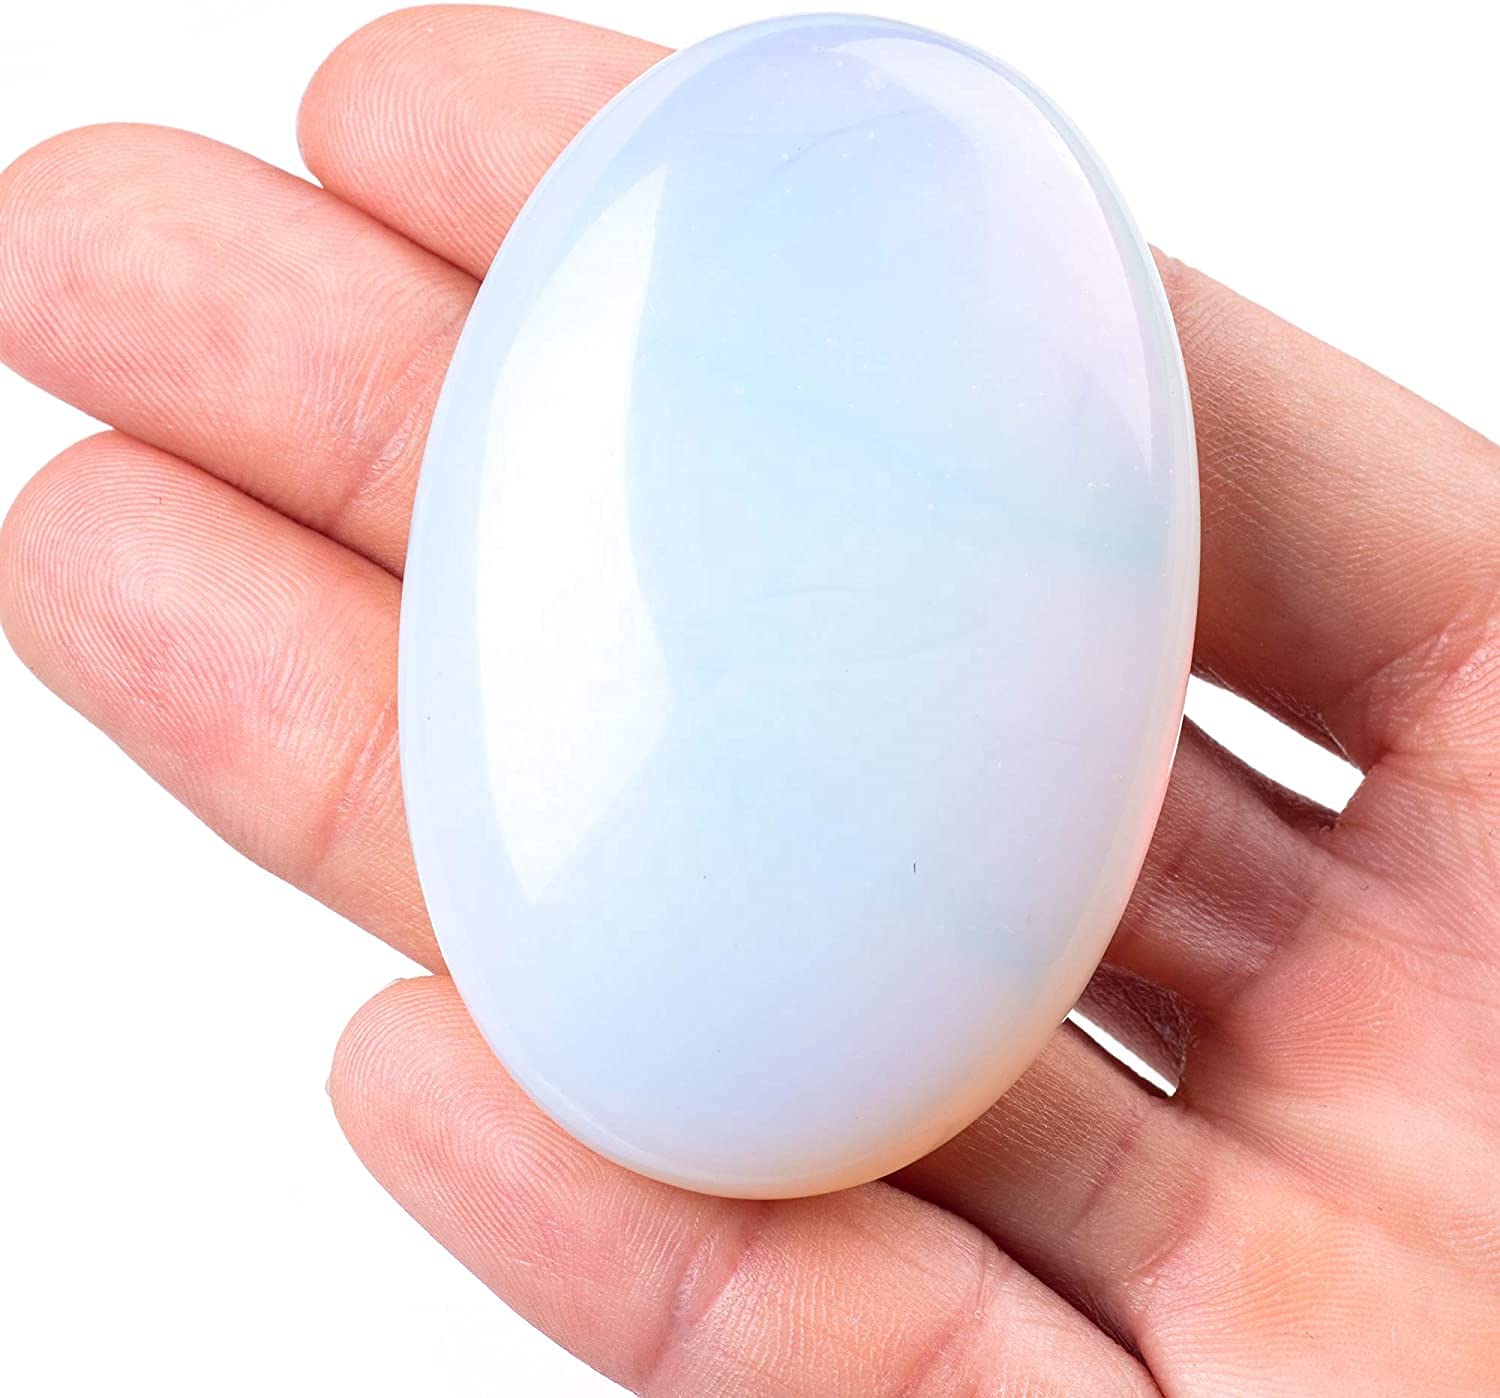 White Opal Stone in Hand